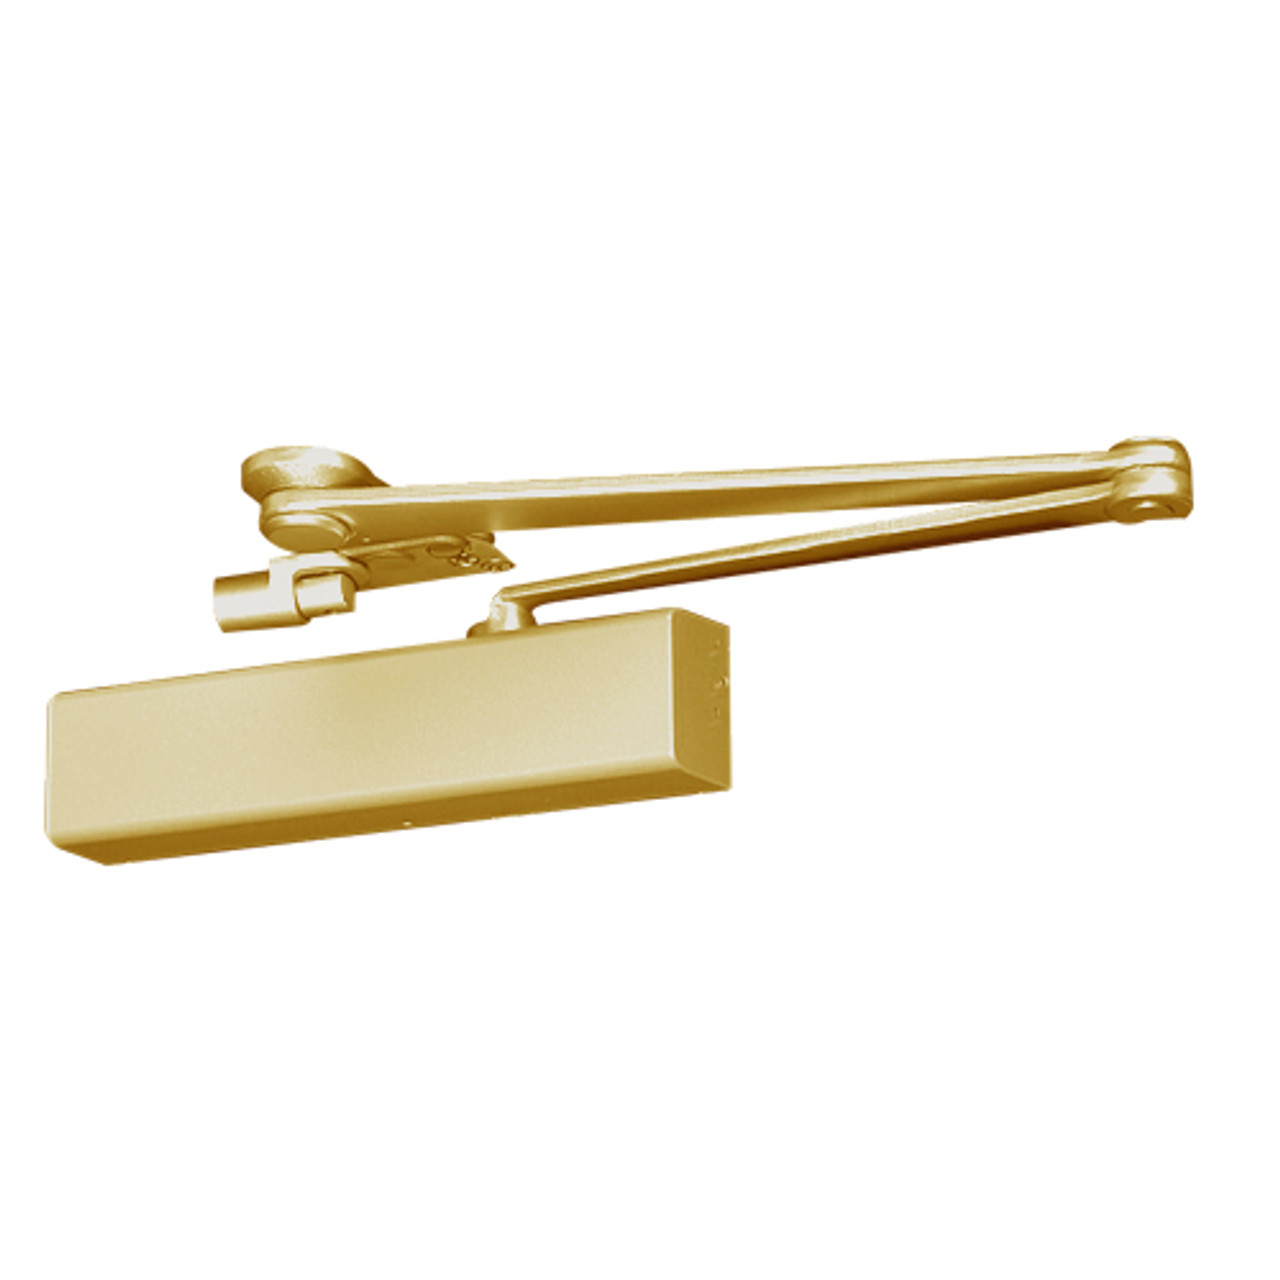 CPS8501TDA-696 Norton 8000 Series Full Cover Hold Open Door Closers with CloserPlus Spring Arm in Gold Finish